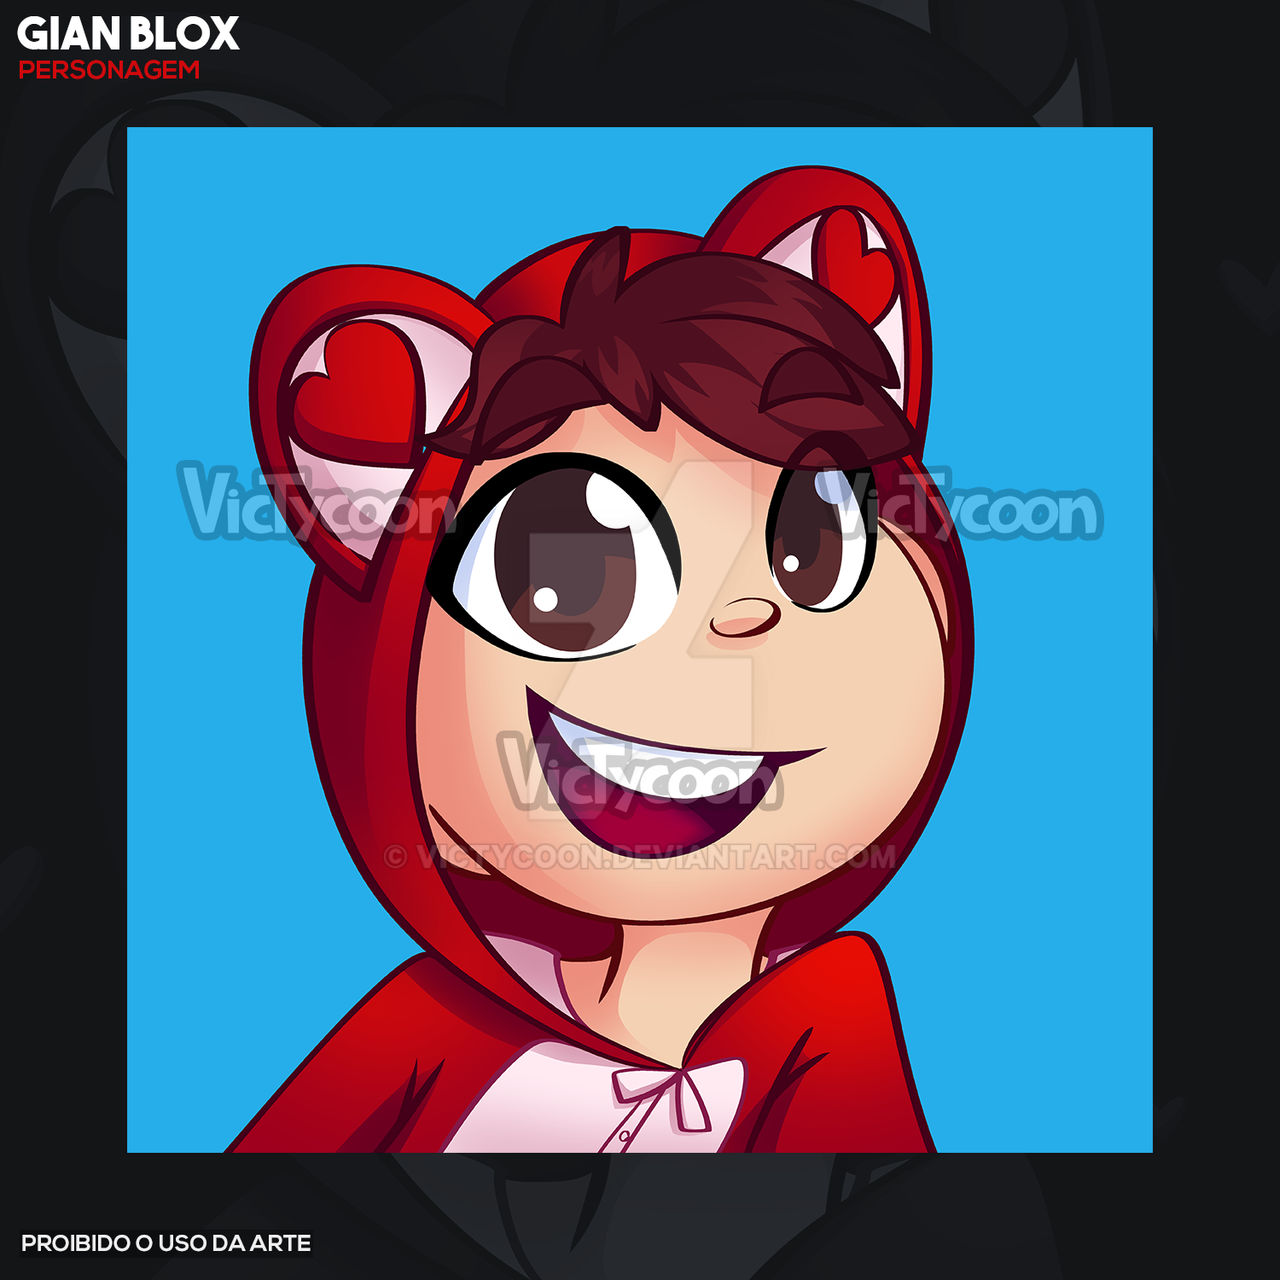 AVATAR - GianBlox (Youtube Roblox) by VicTycoon on DeviantArt